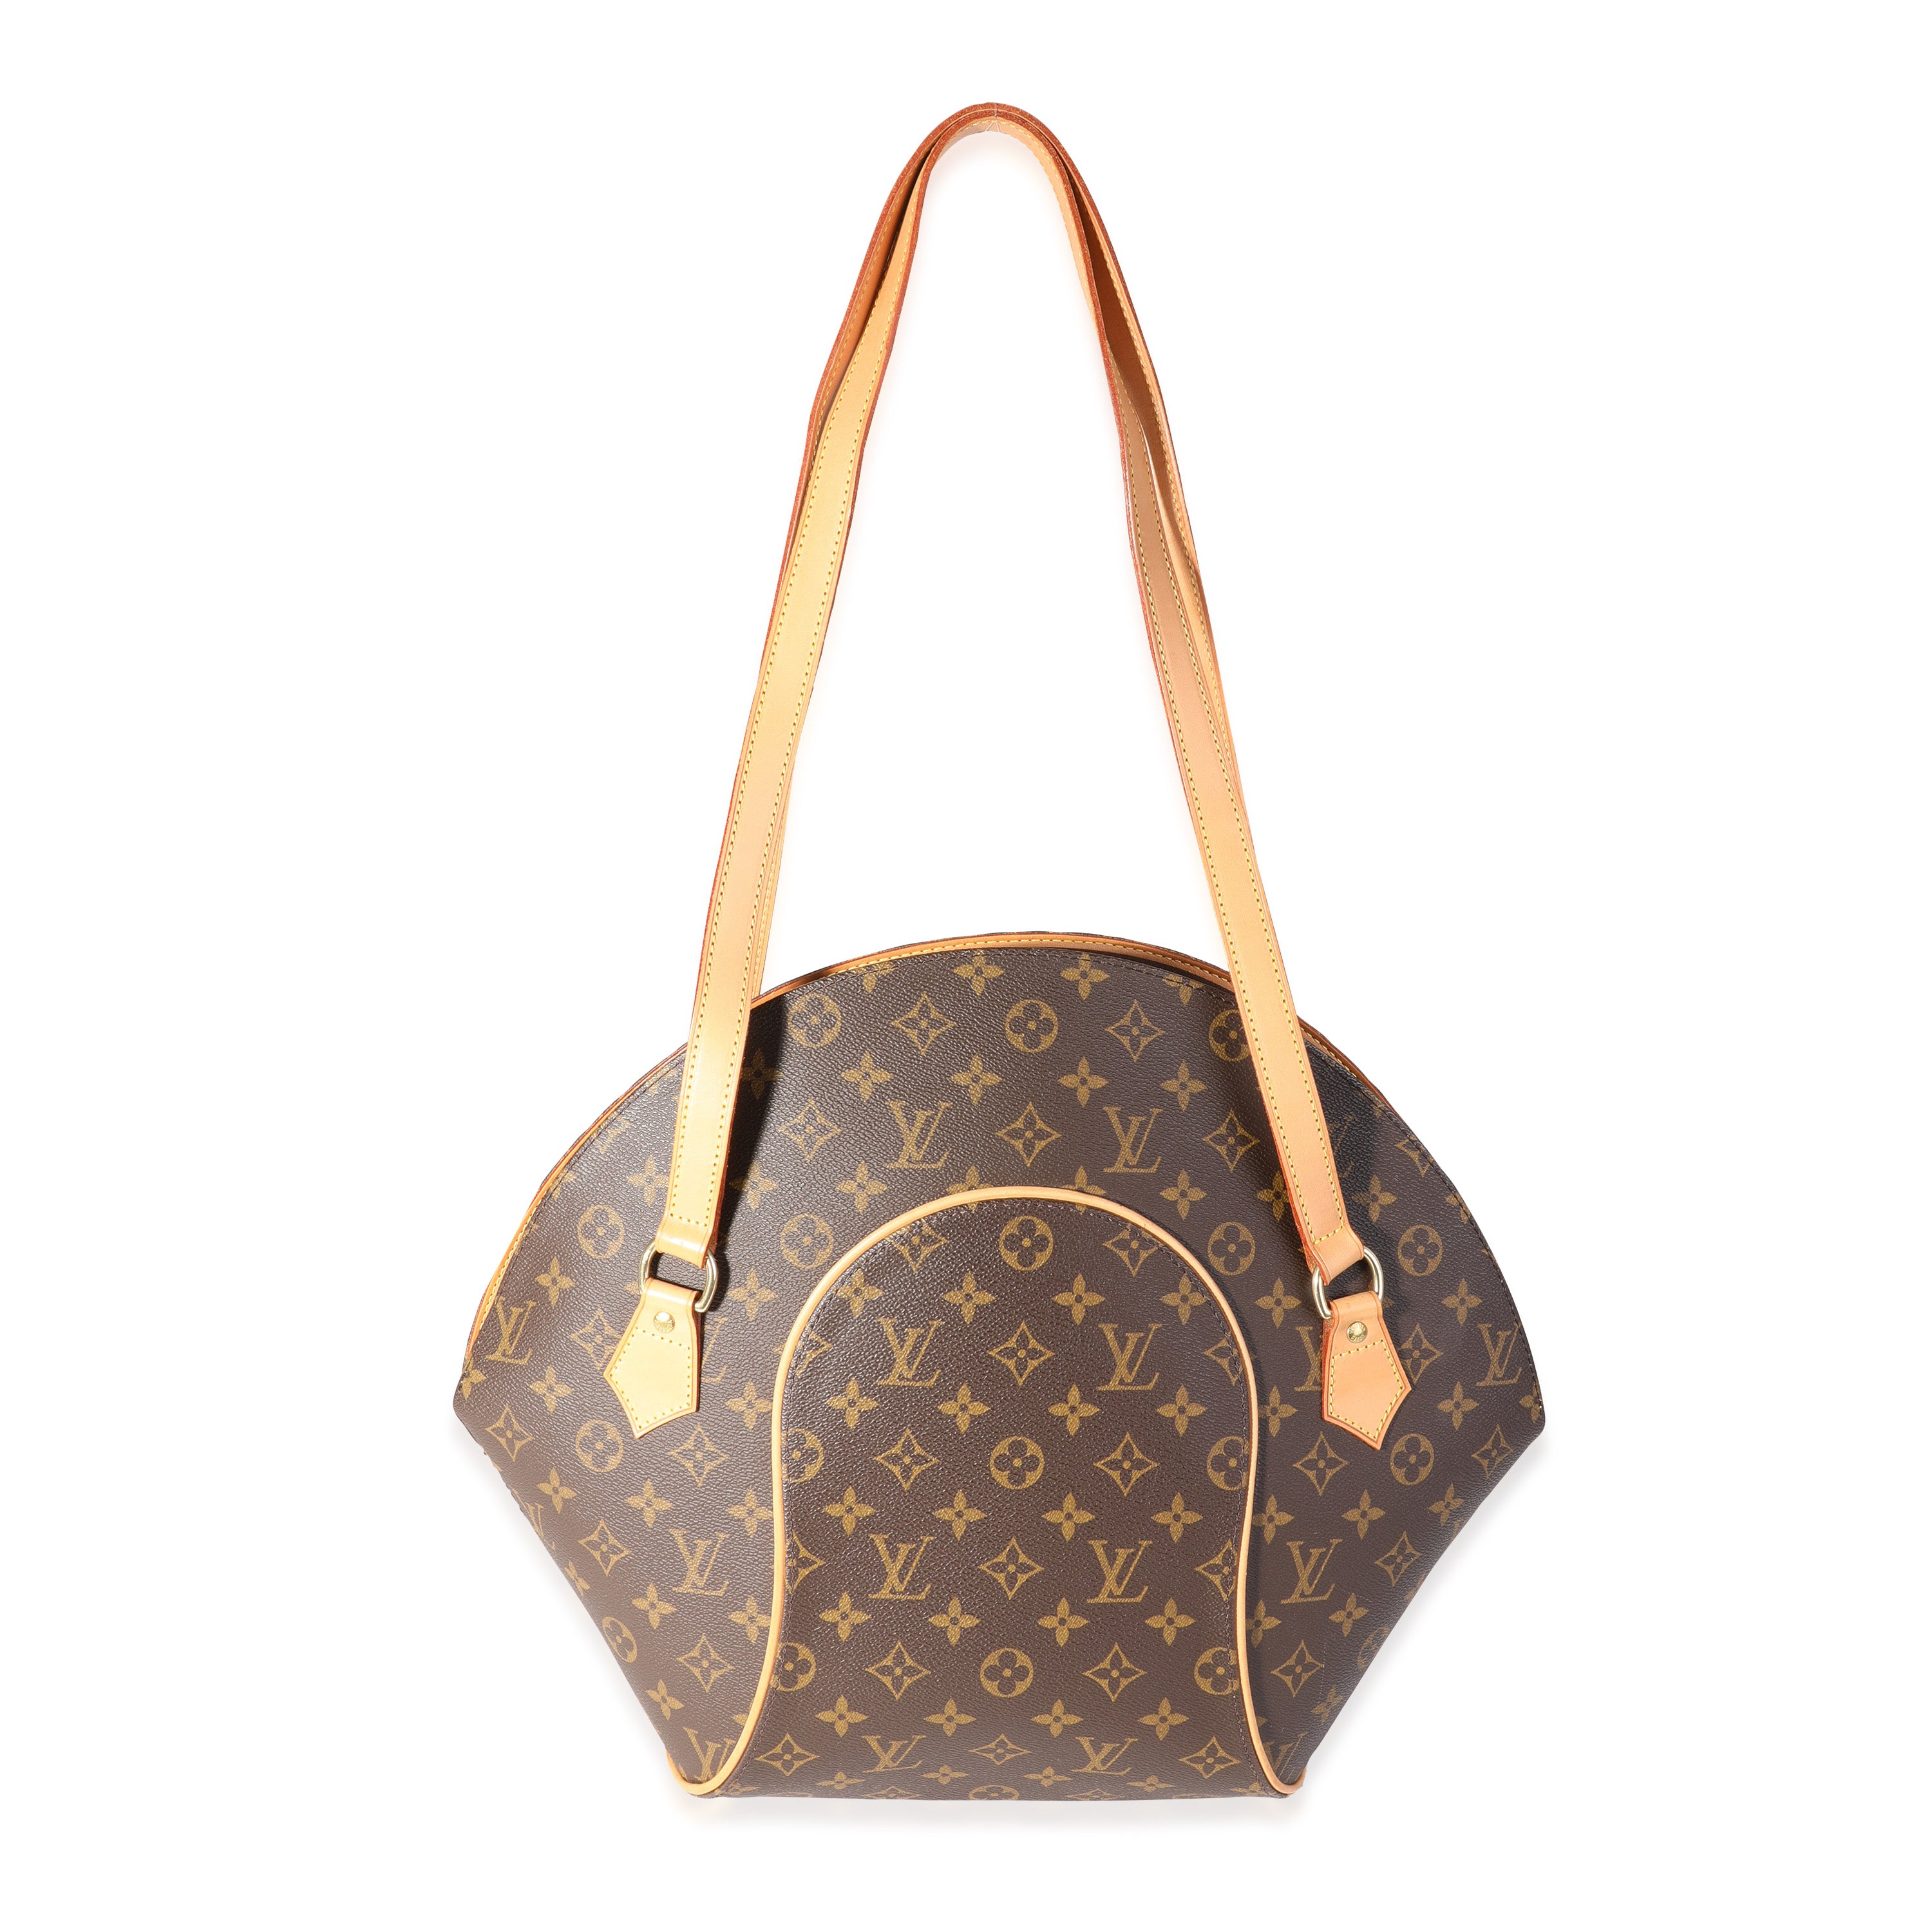 A Guide to Authenticating the Louis Vuitton Ellipse Shopping, MM